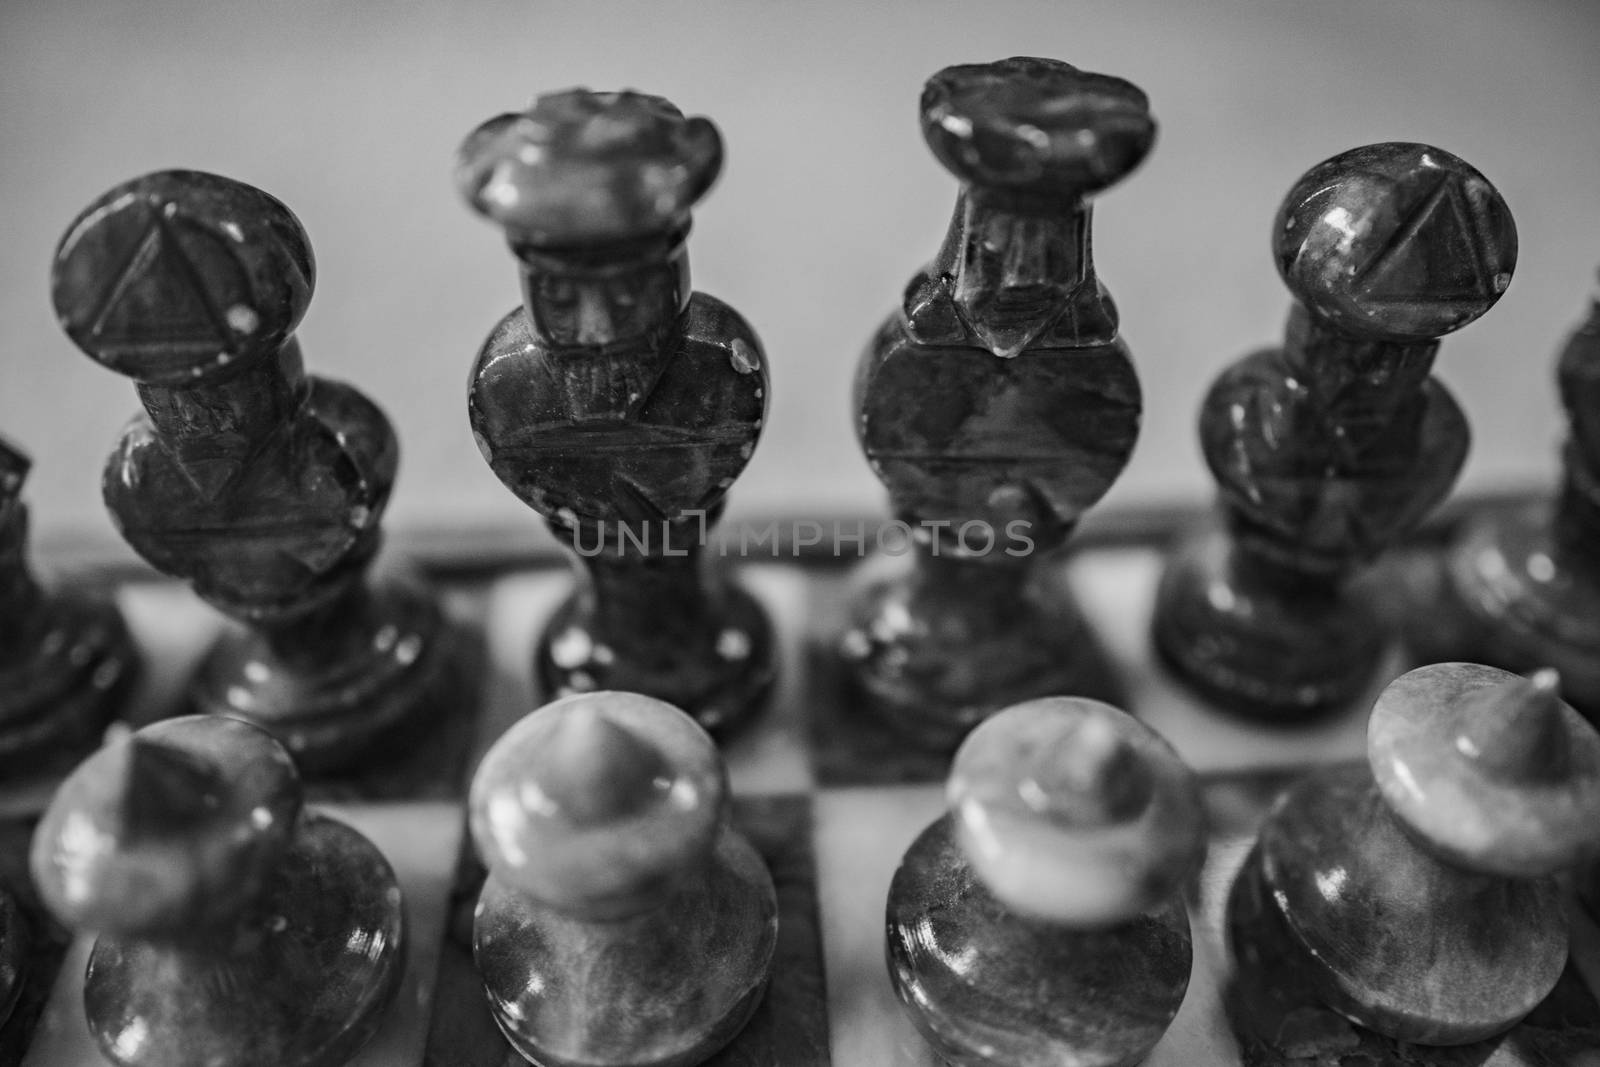 A close up of a chess board and it's pieces